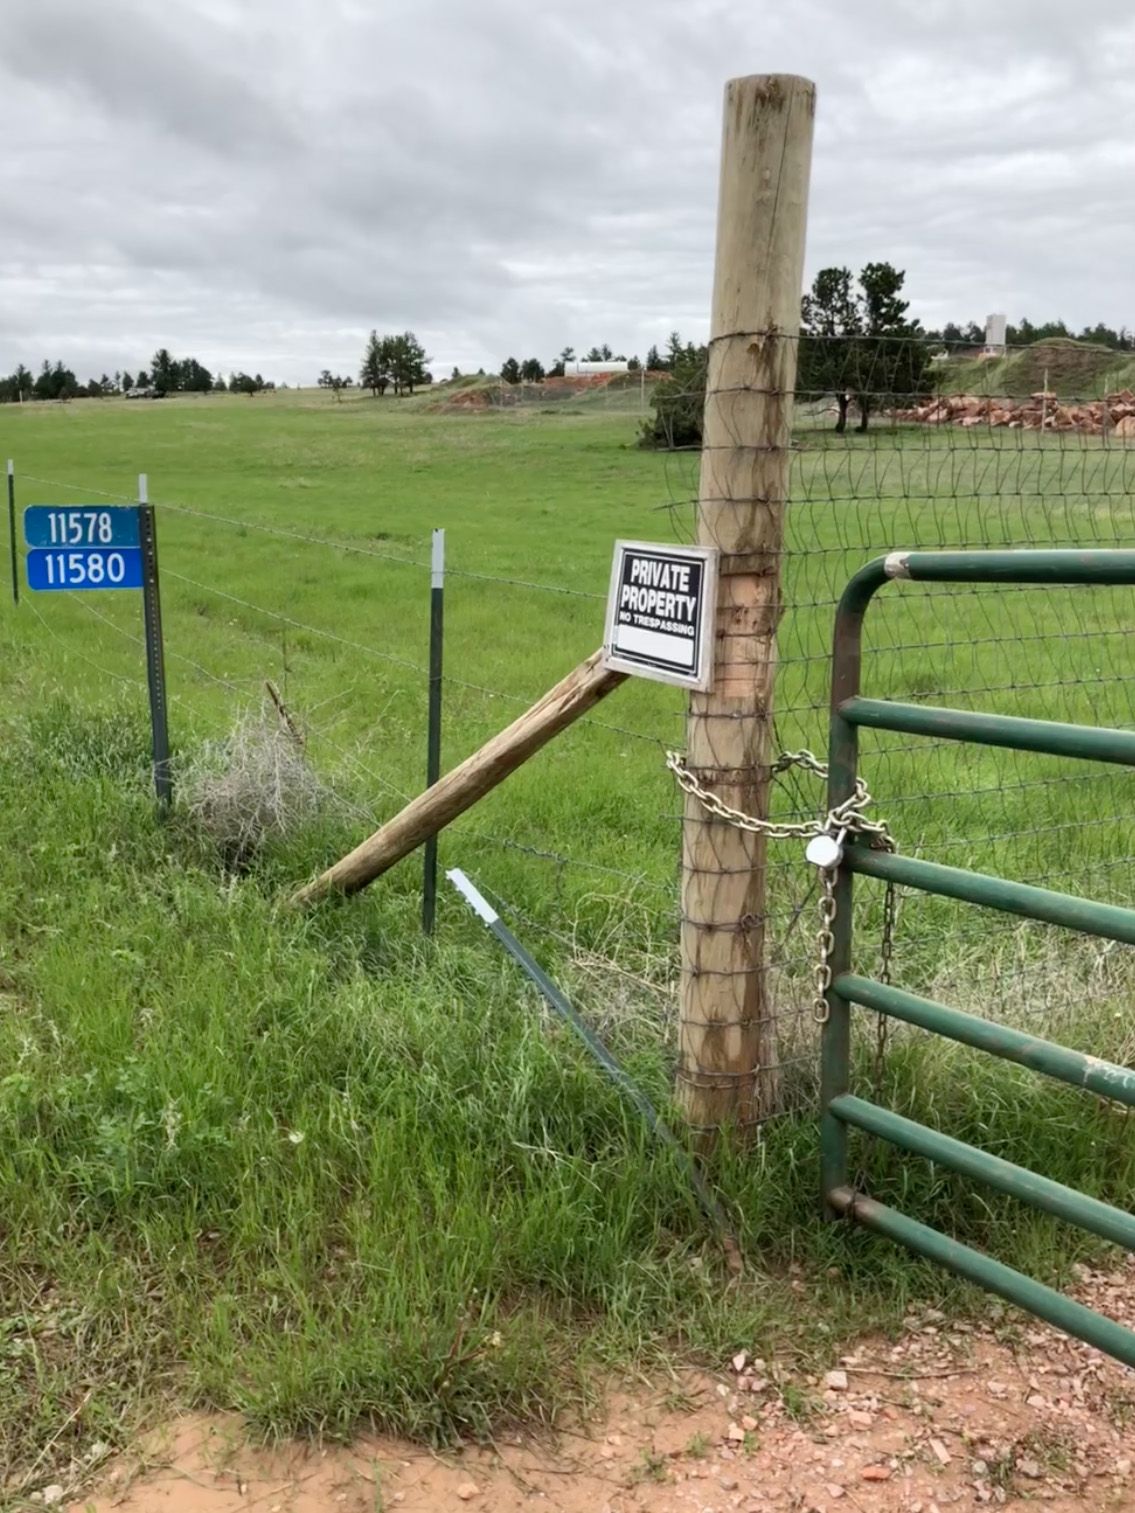 Padlocked gate and fence in field